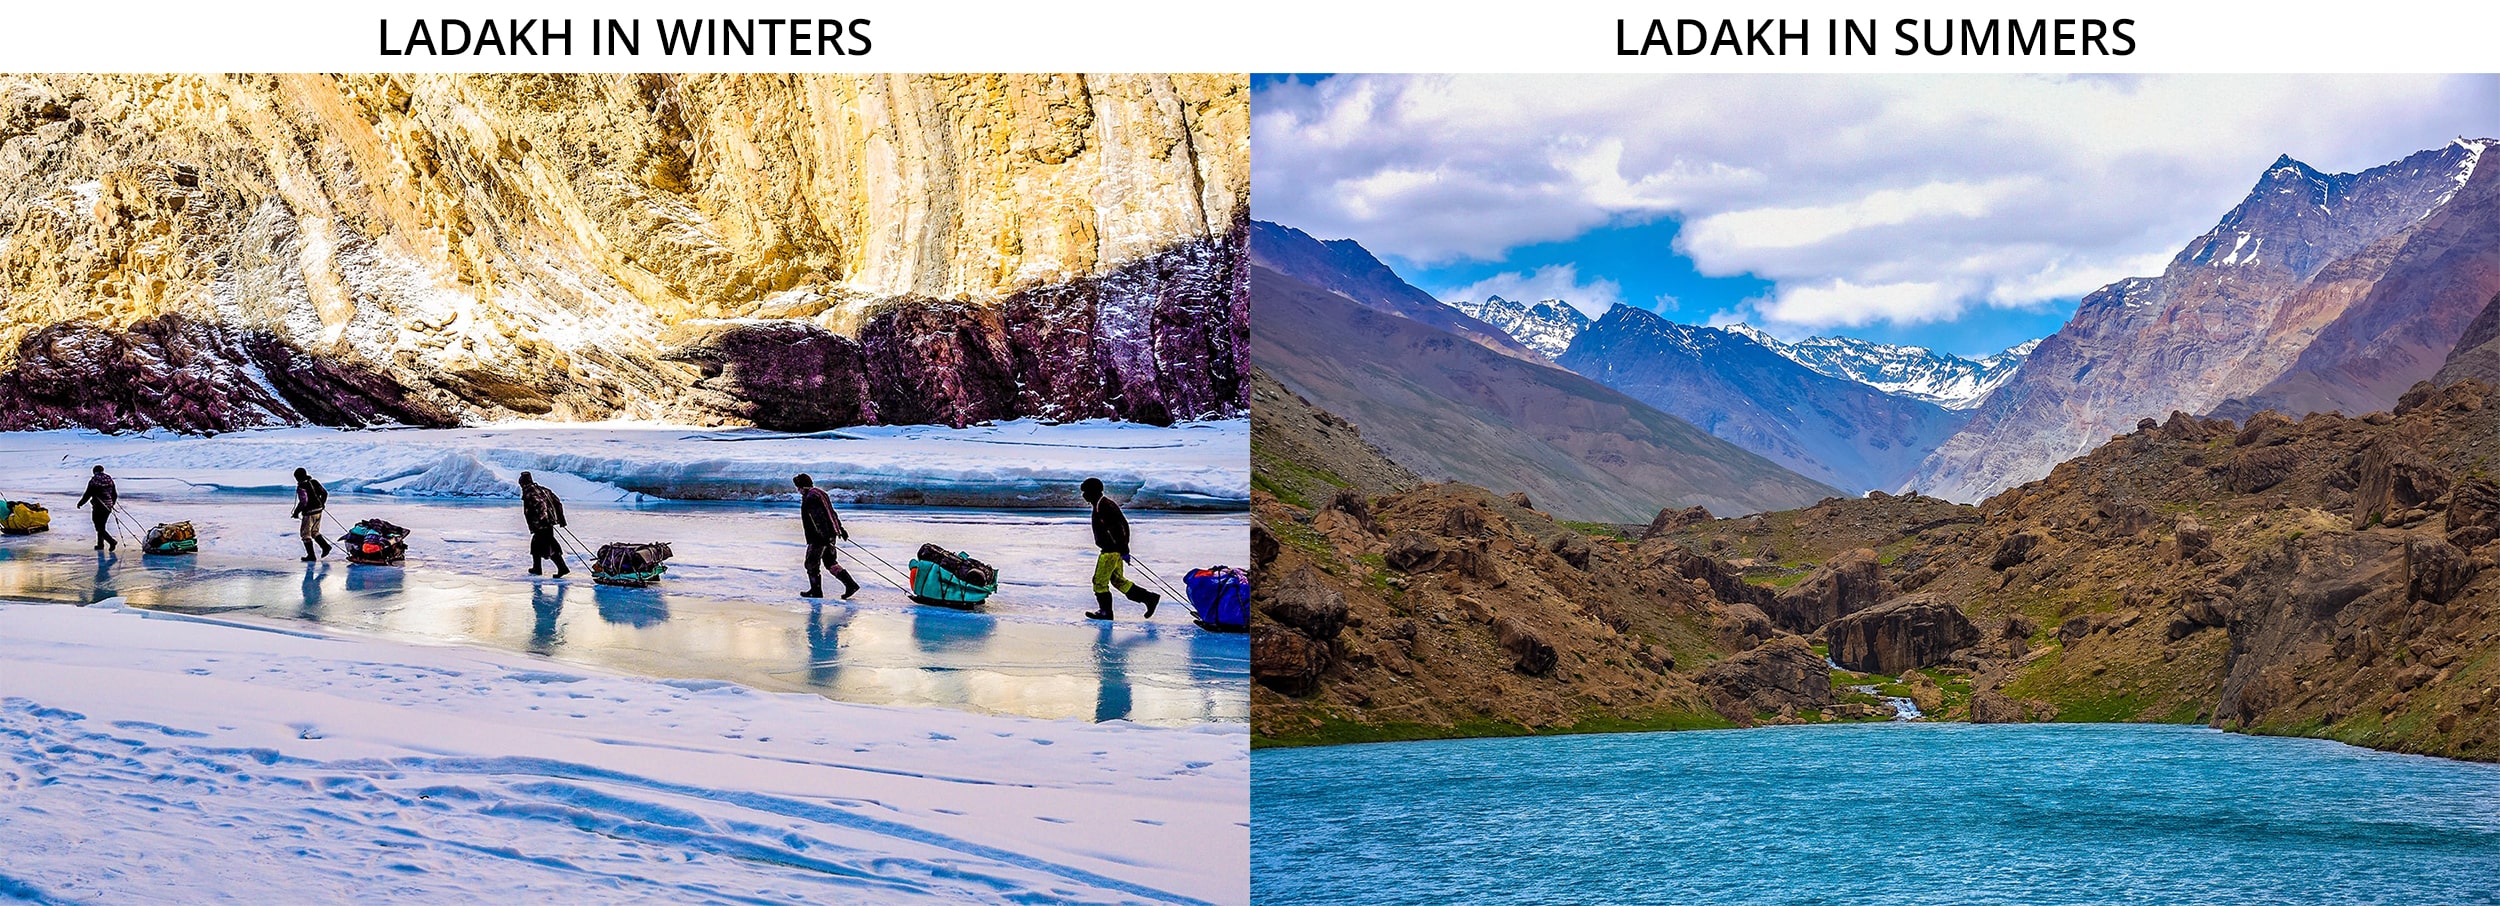 Ladakh during winters as well as summers